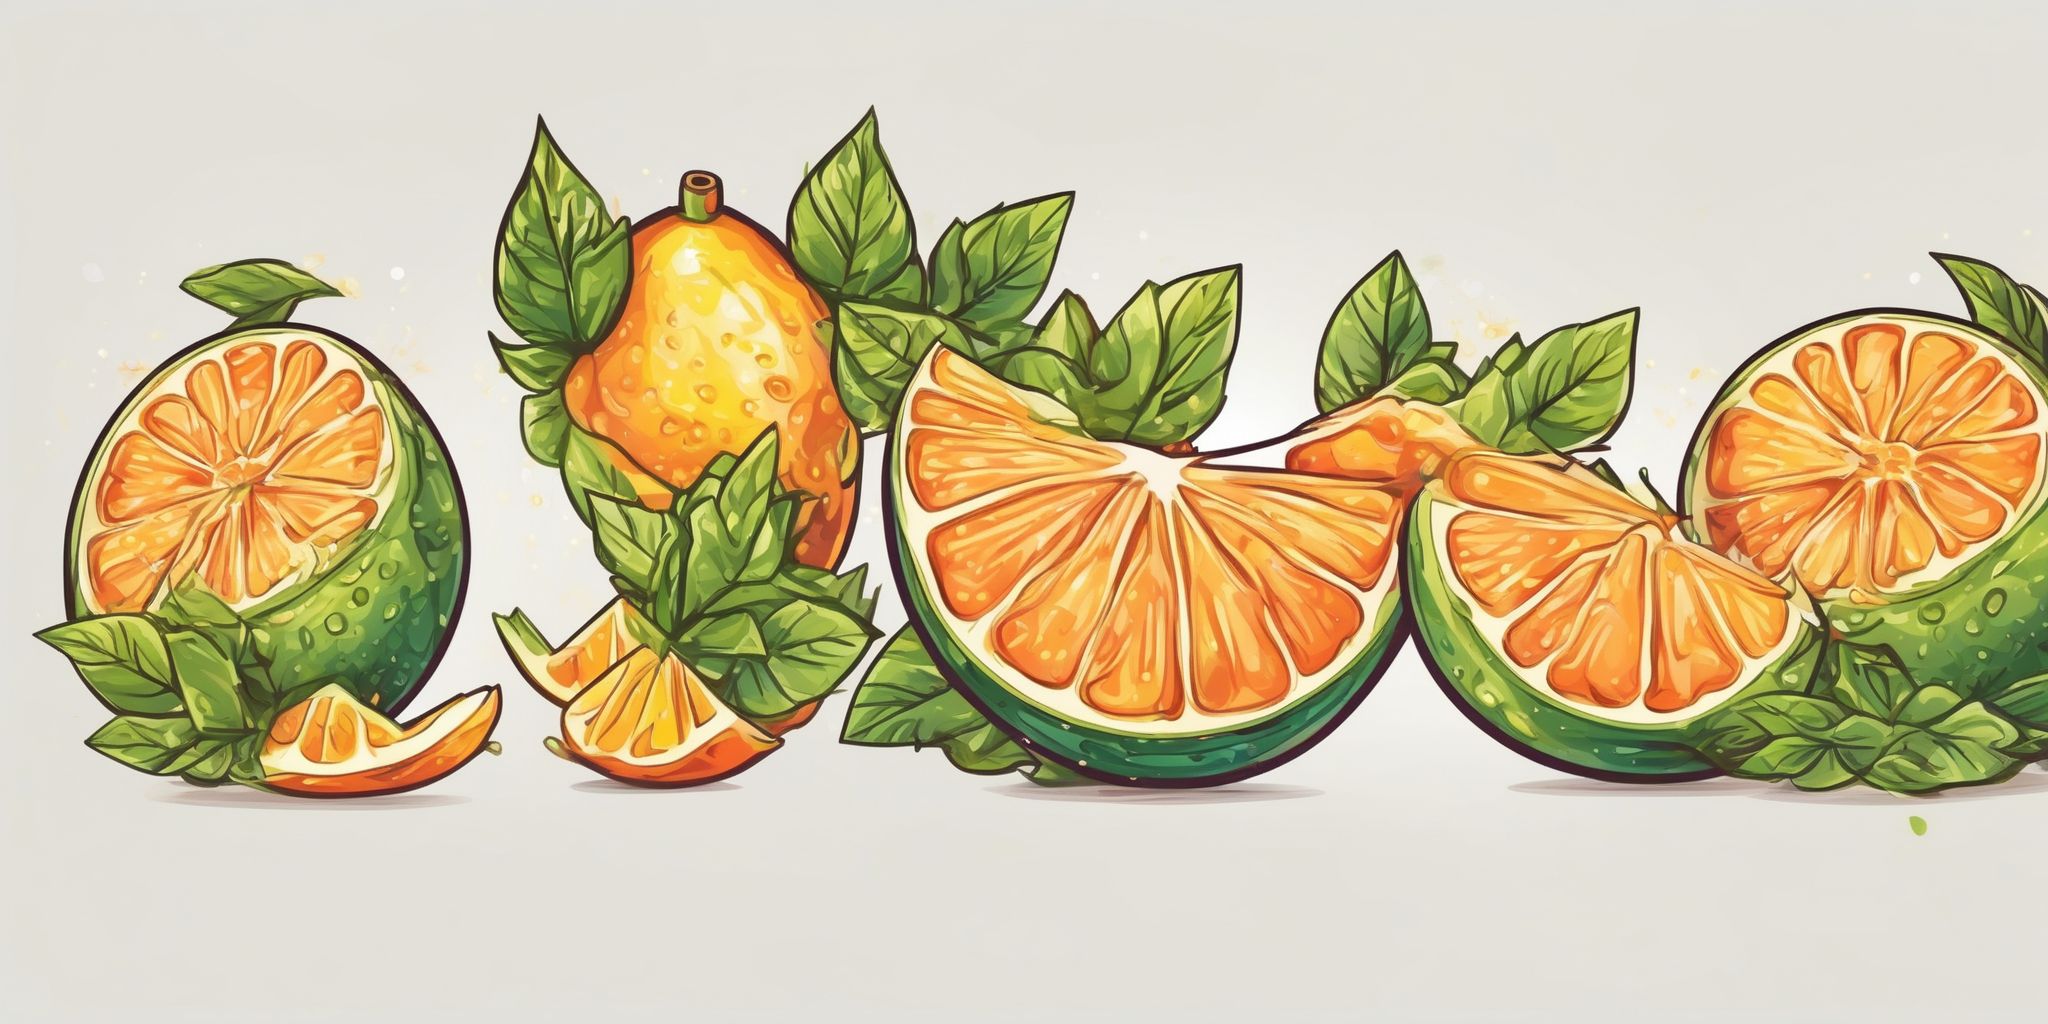 Zesty in illustration style with gradients and white background